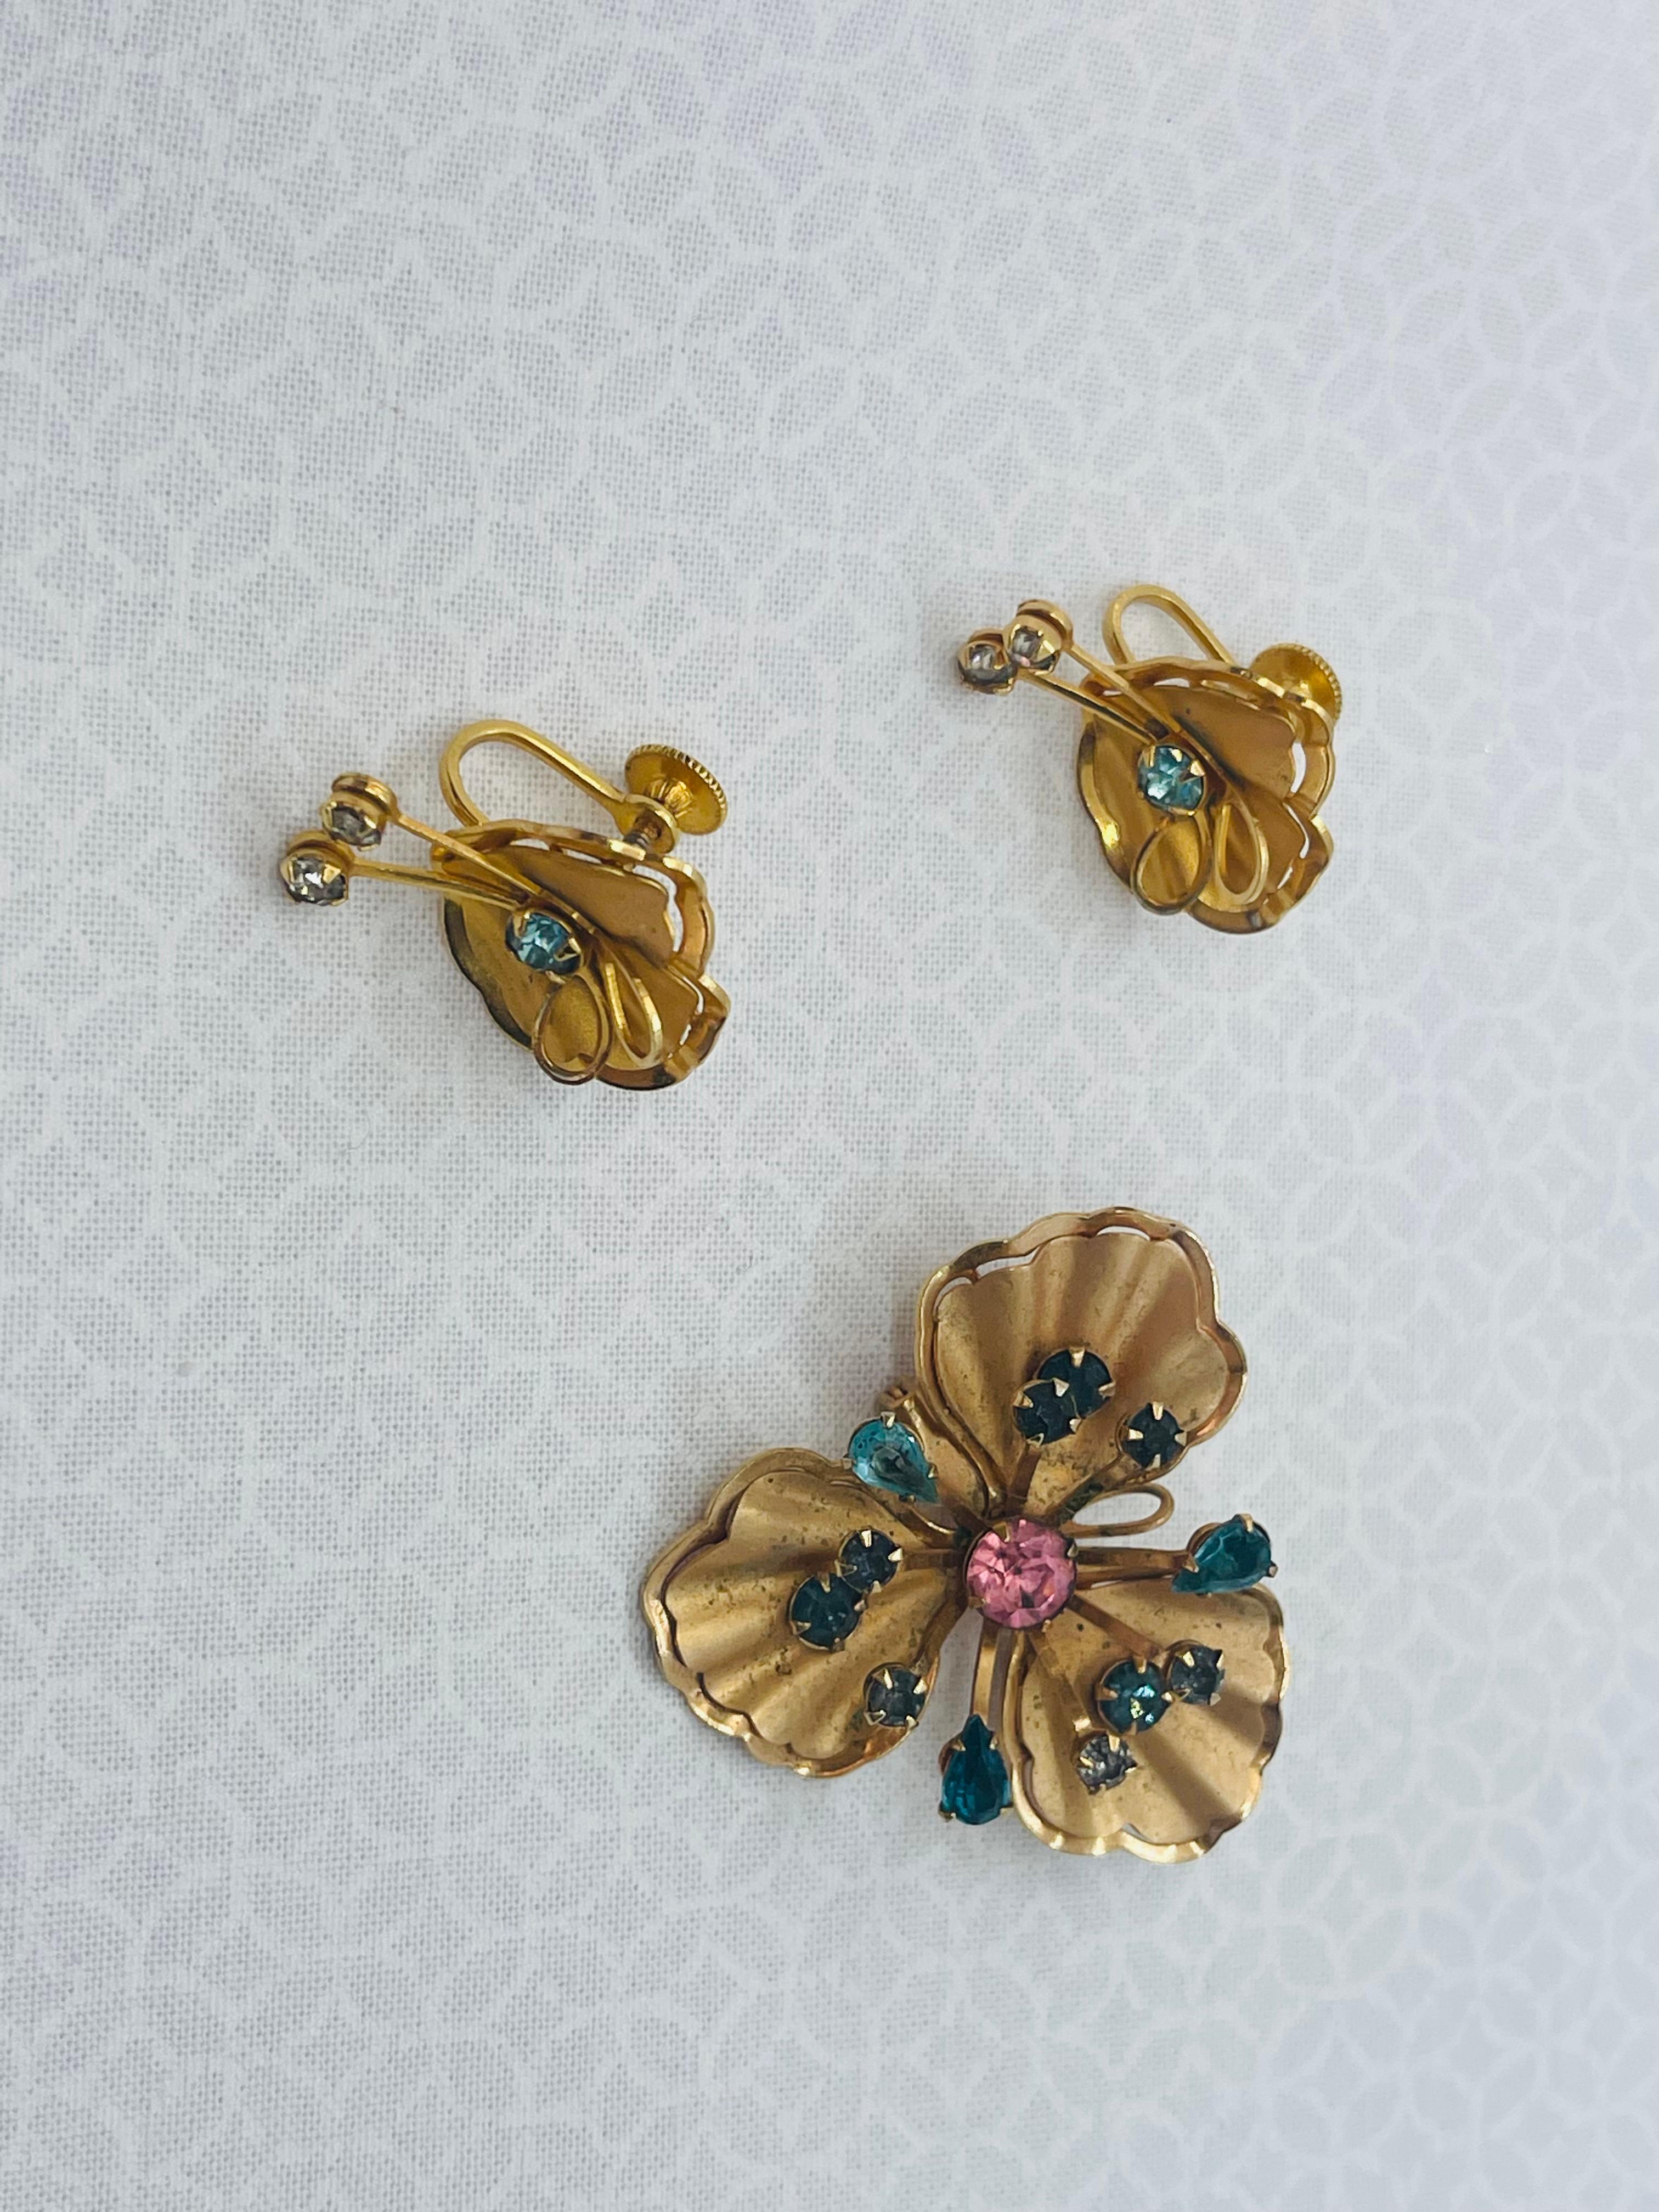 Bugbee & Niles Matching Earrings and Brooch Set Circa. 1955s - 1959 For Sale 7